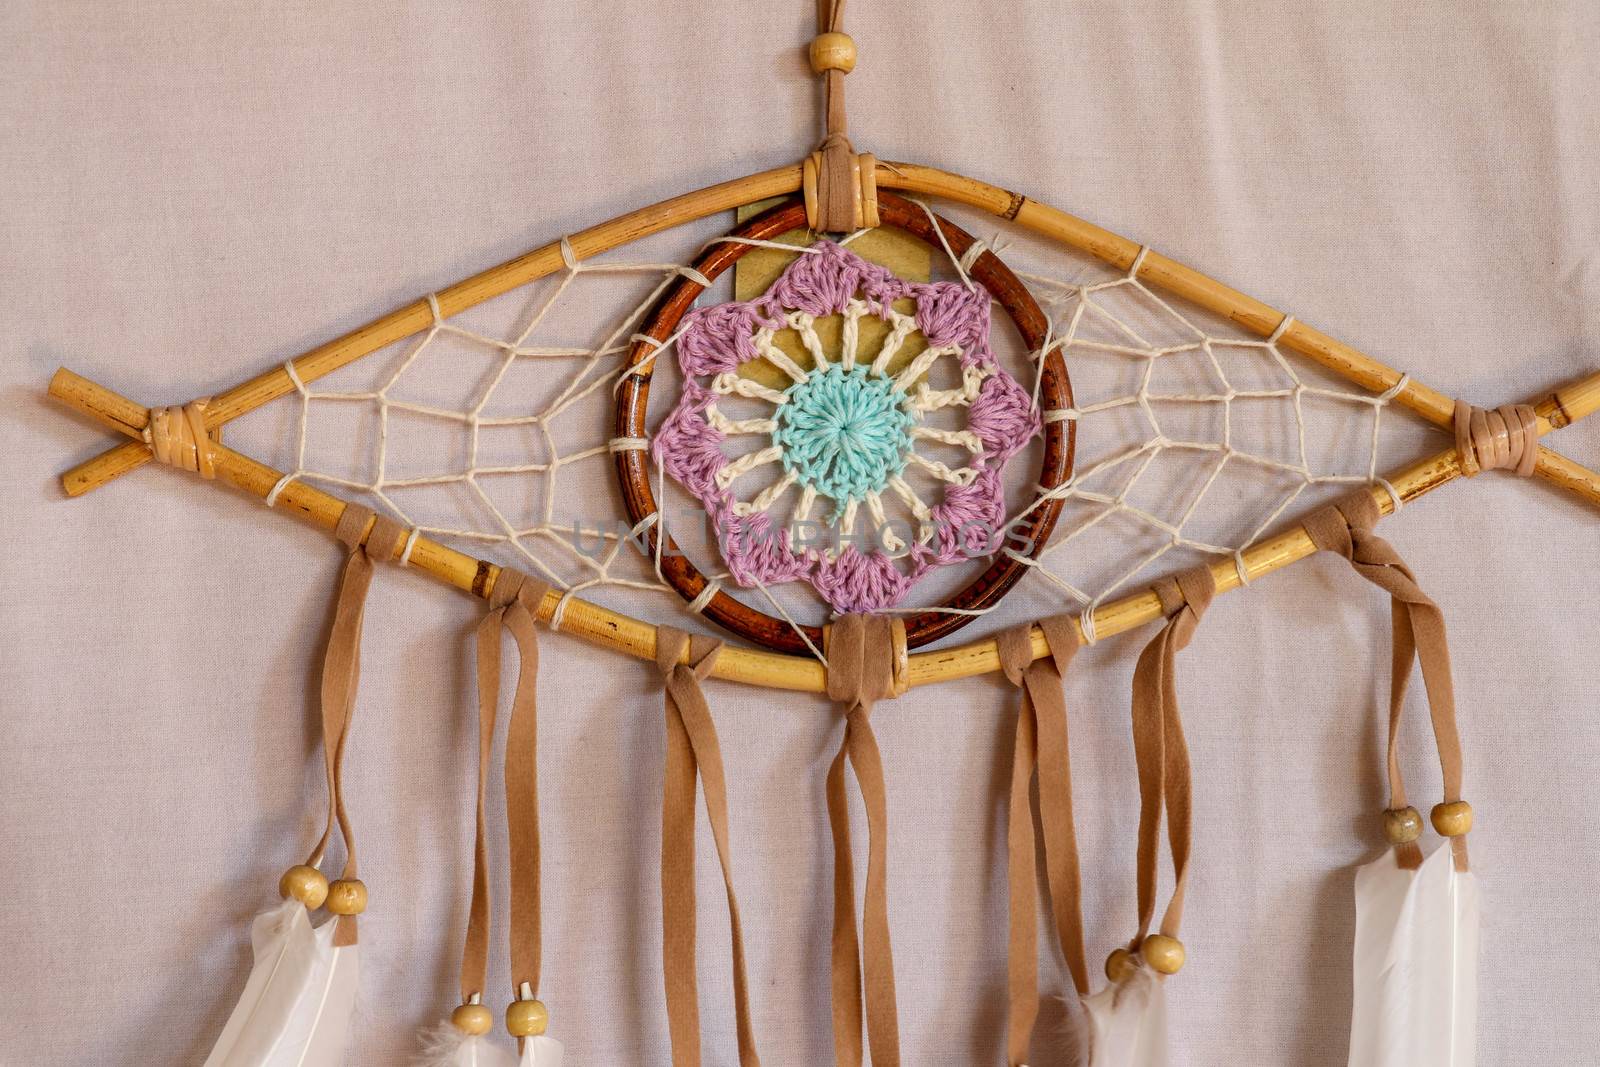 god eye of providence dreamcatcher with white feathers on a whit by Sanatana2008